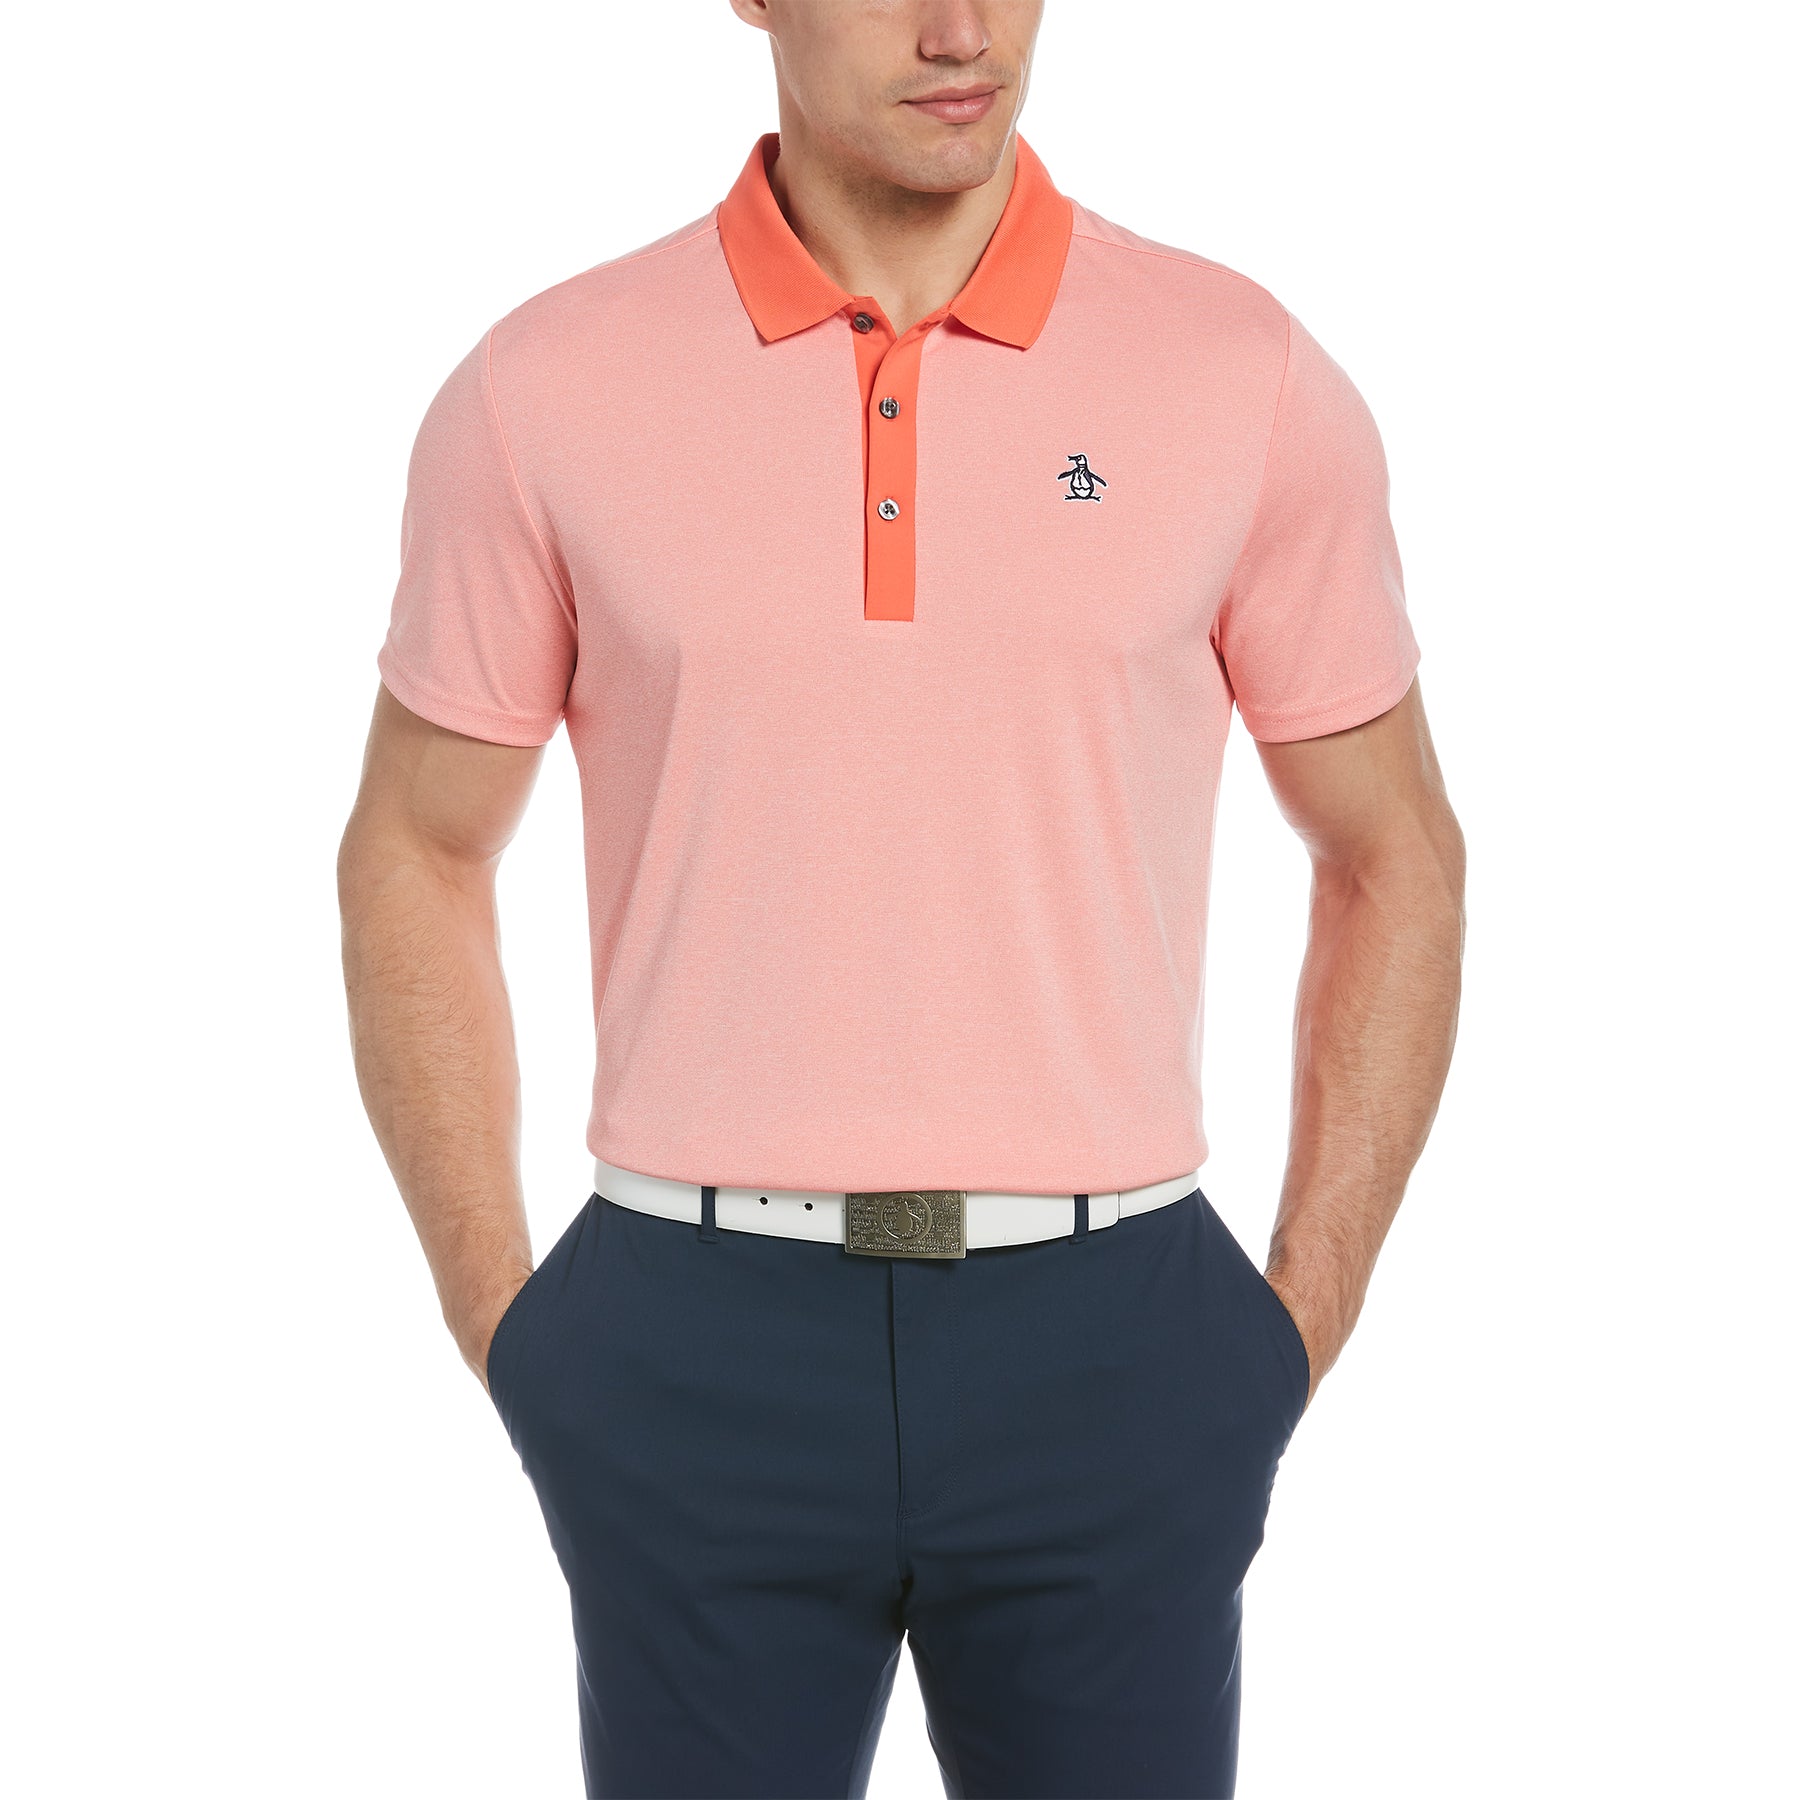 View Three Strokes Golf Polo In Orange Coral Heather information